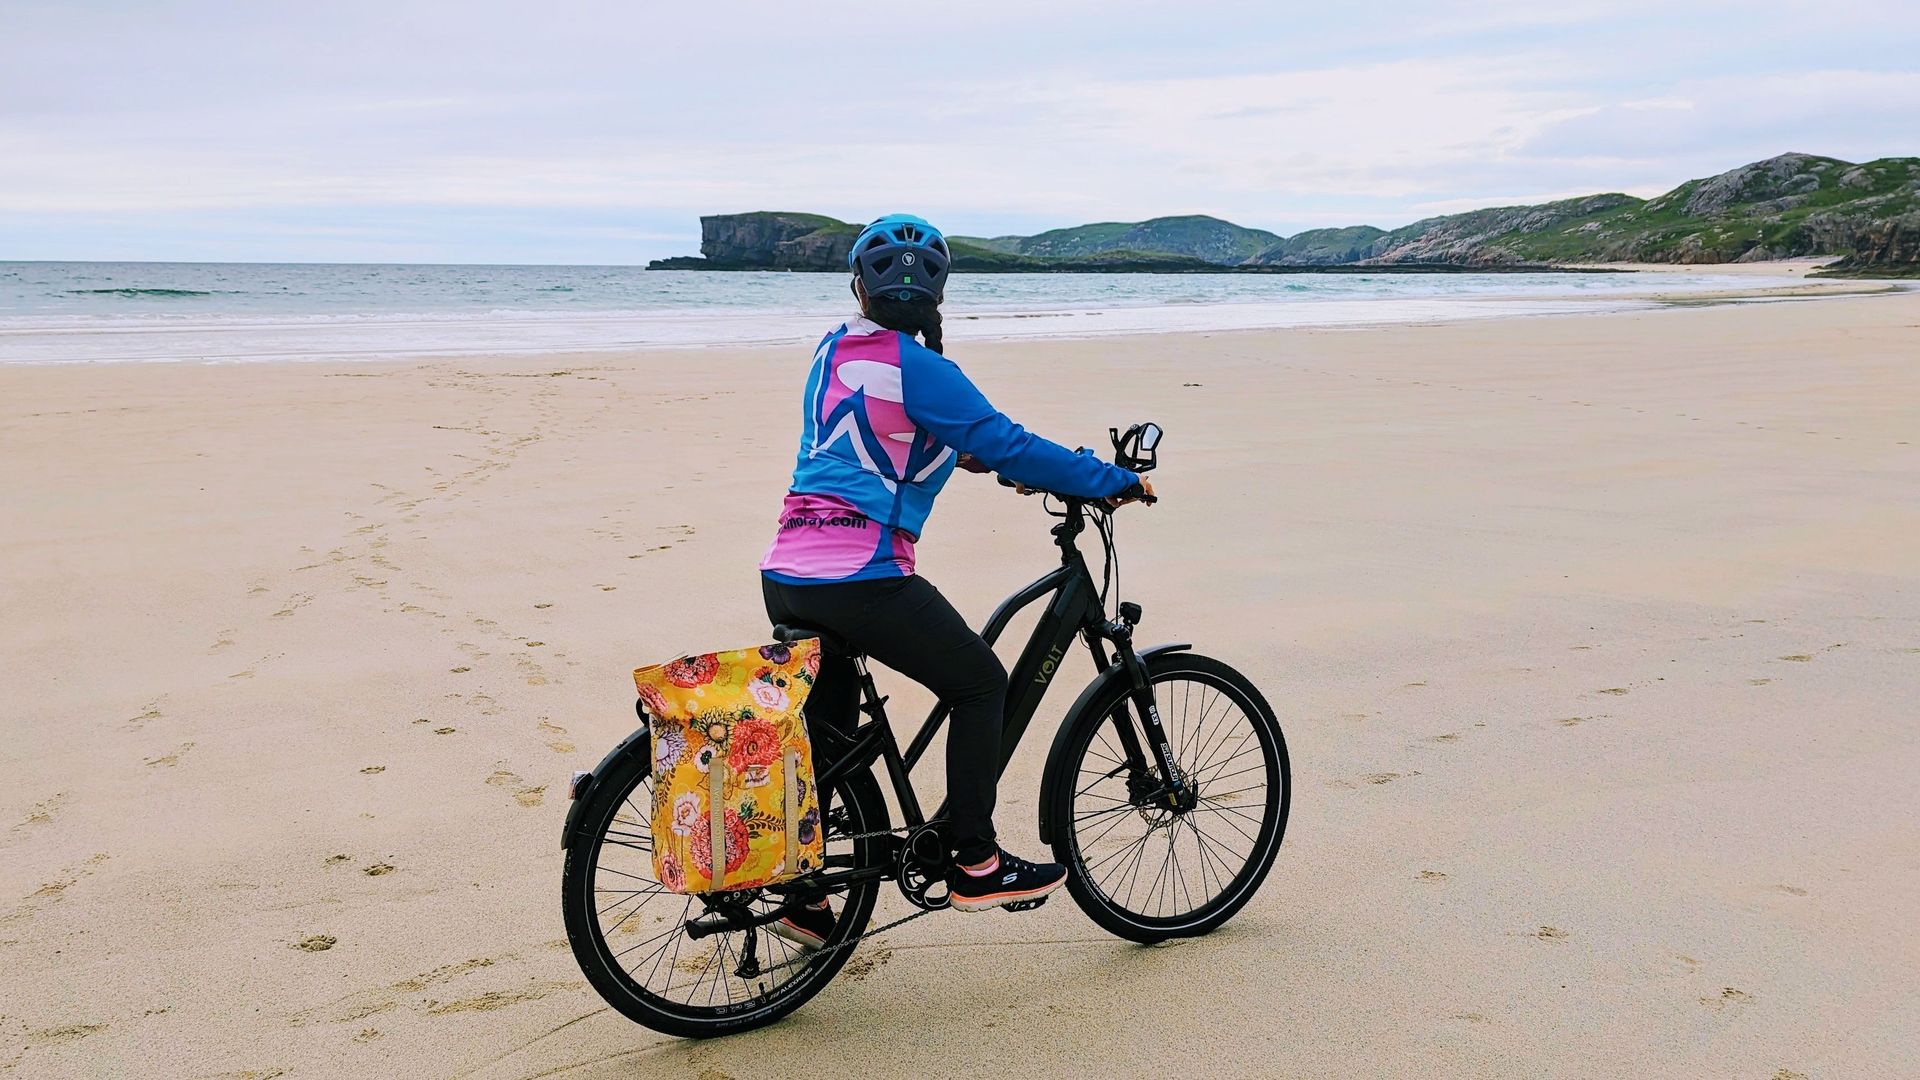 Karen Cox with Pulse LS cycling at the beach